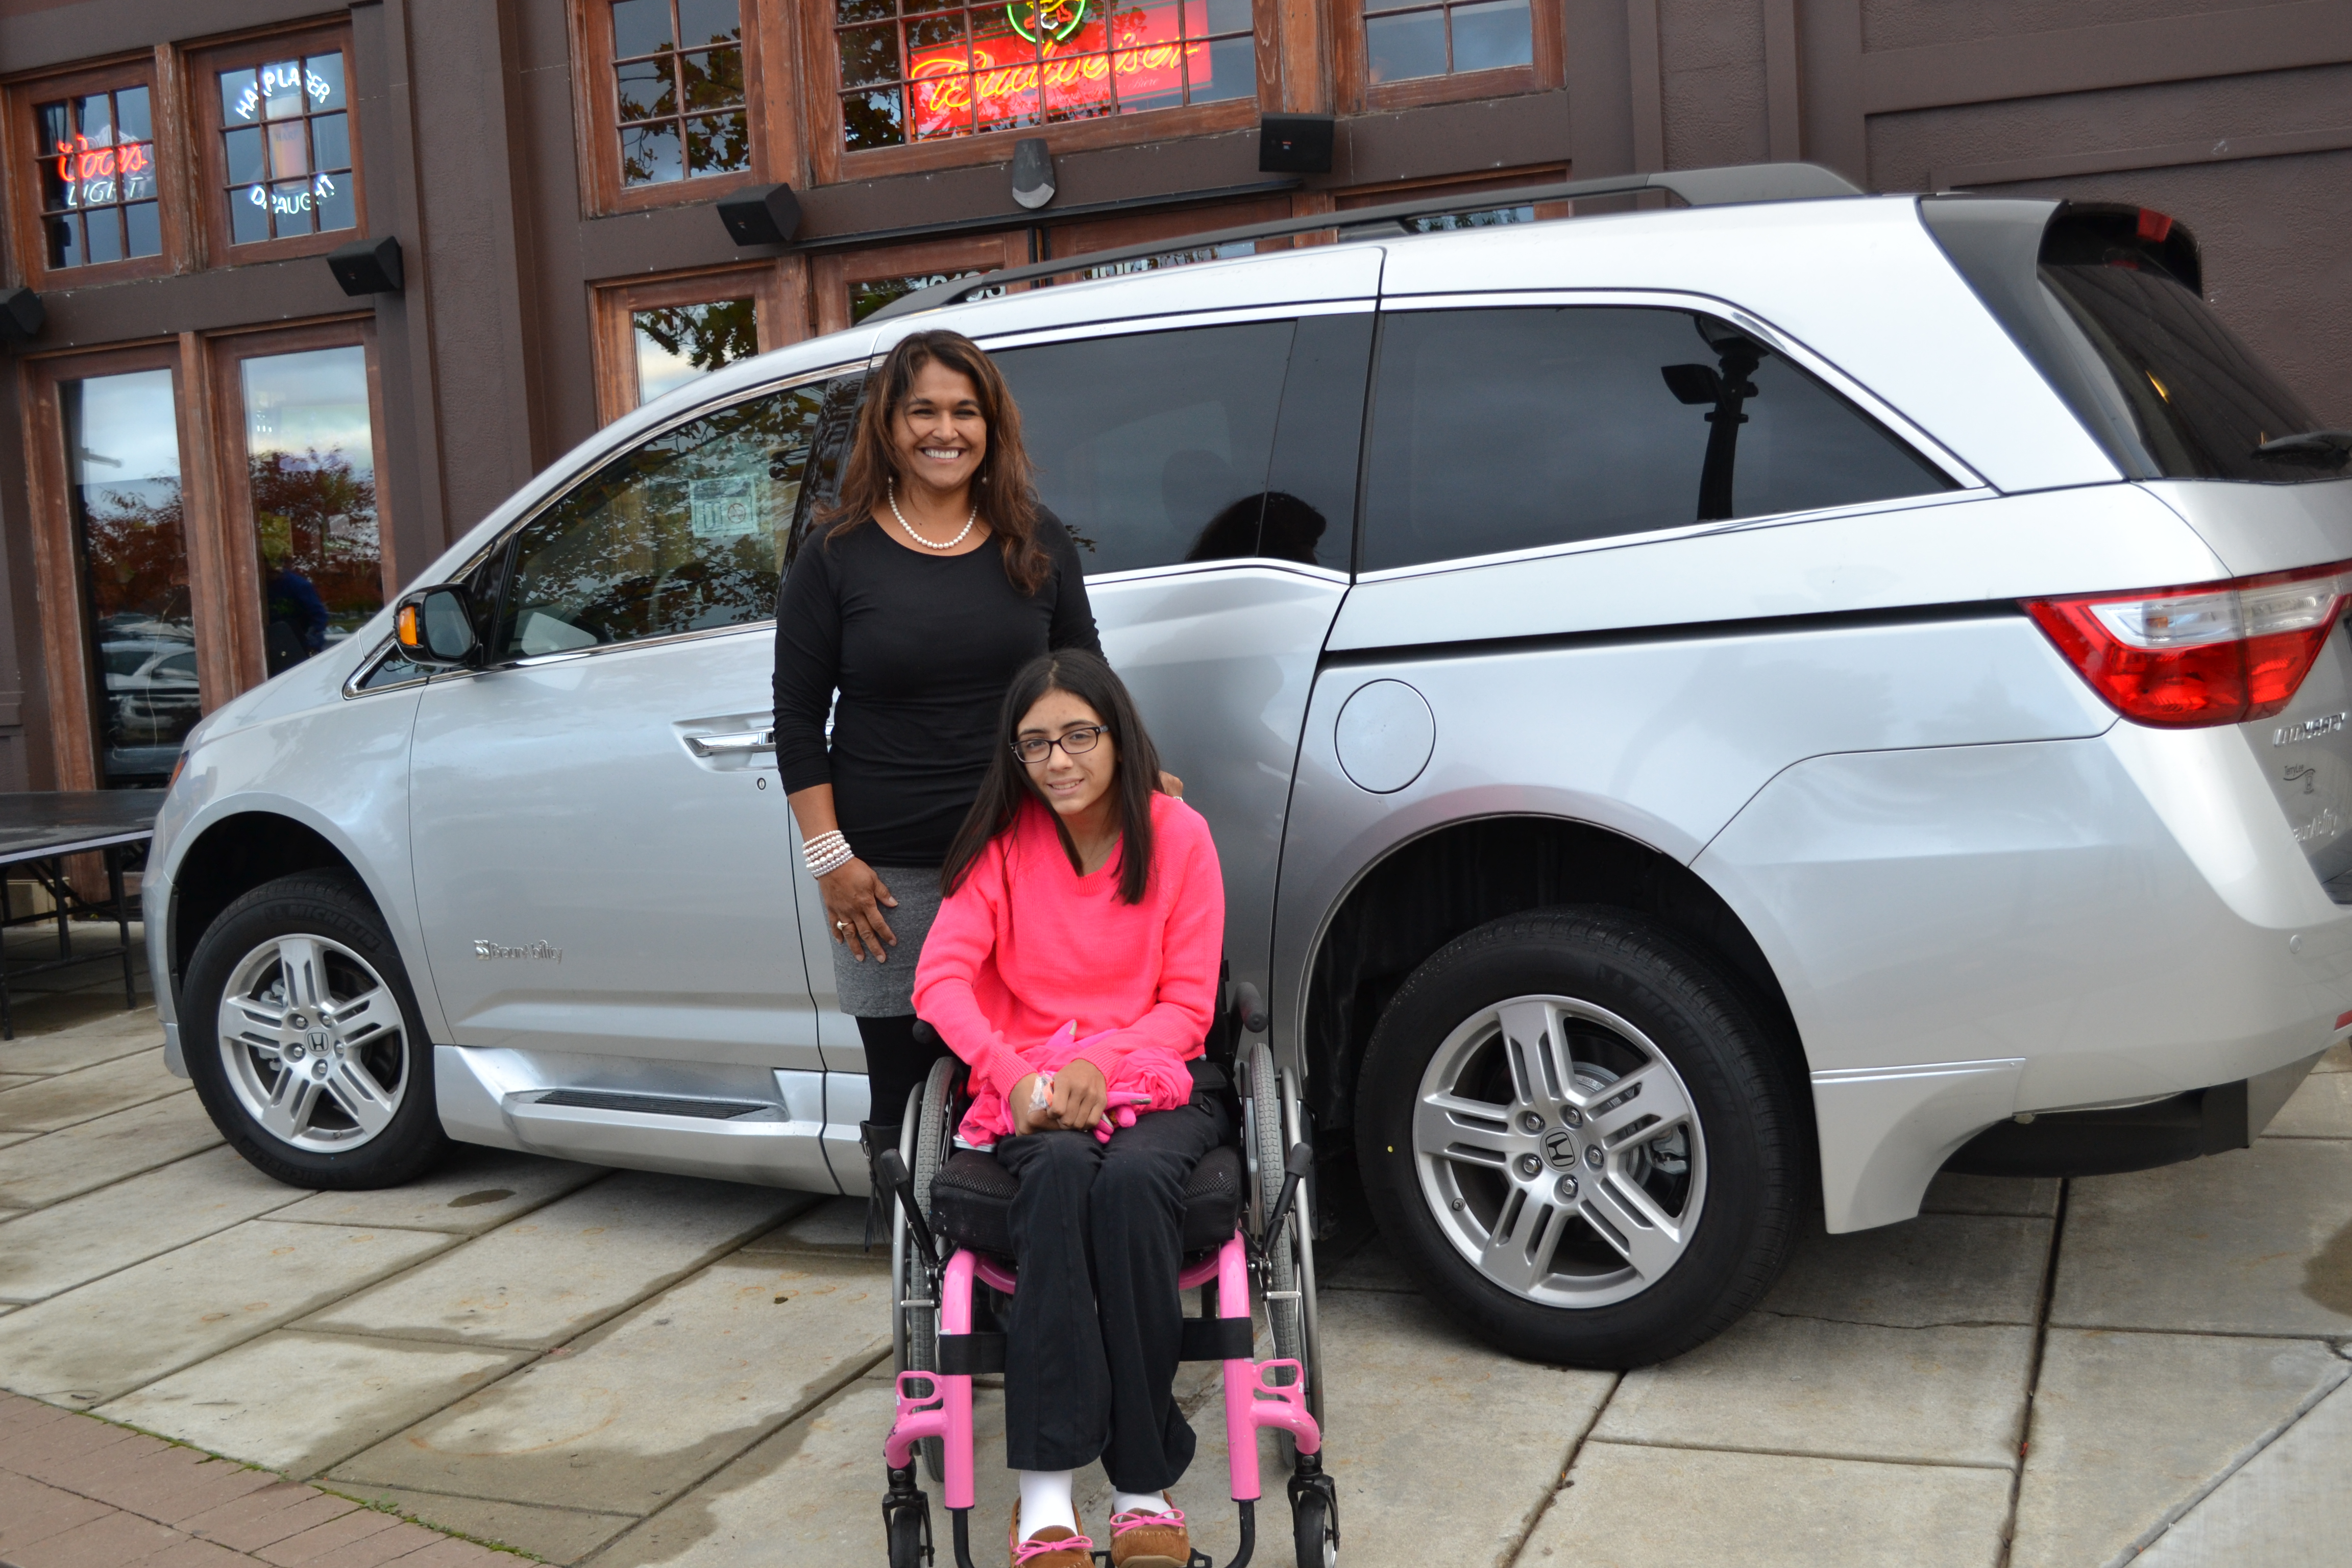 Mia Carter with her mother, Isabel, and their new van bought with contributions through Pub Theology and Samantha’s House and Van. (photo by Ann Craig-Cinnamon)